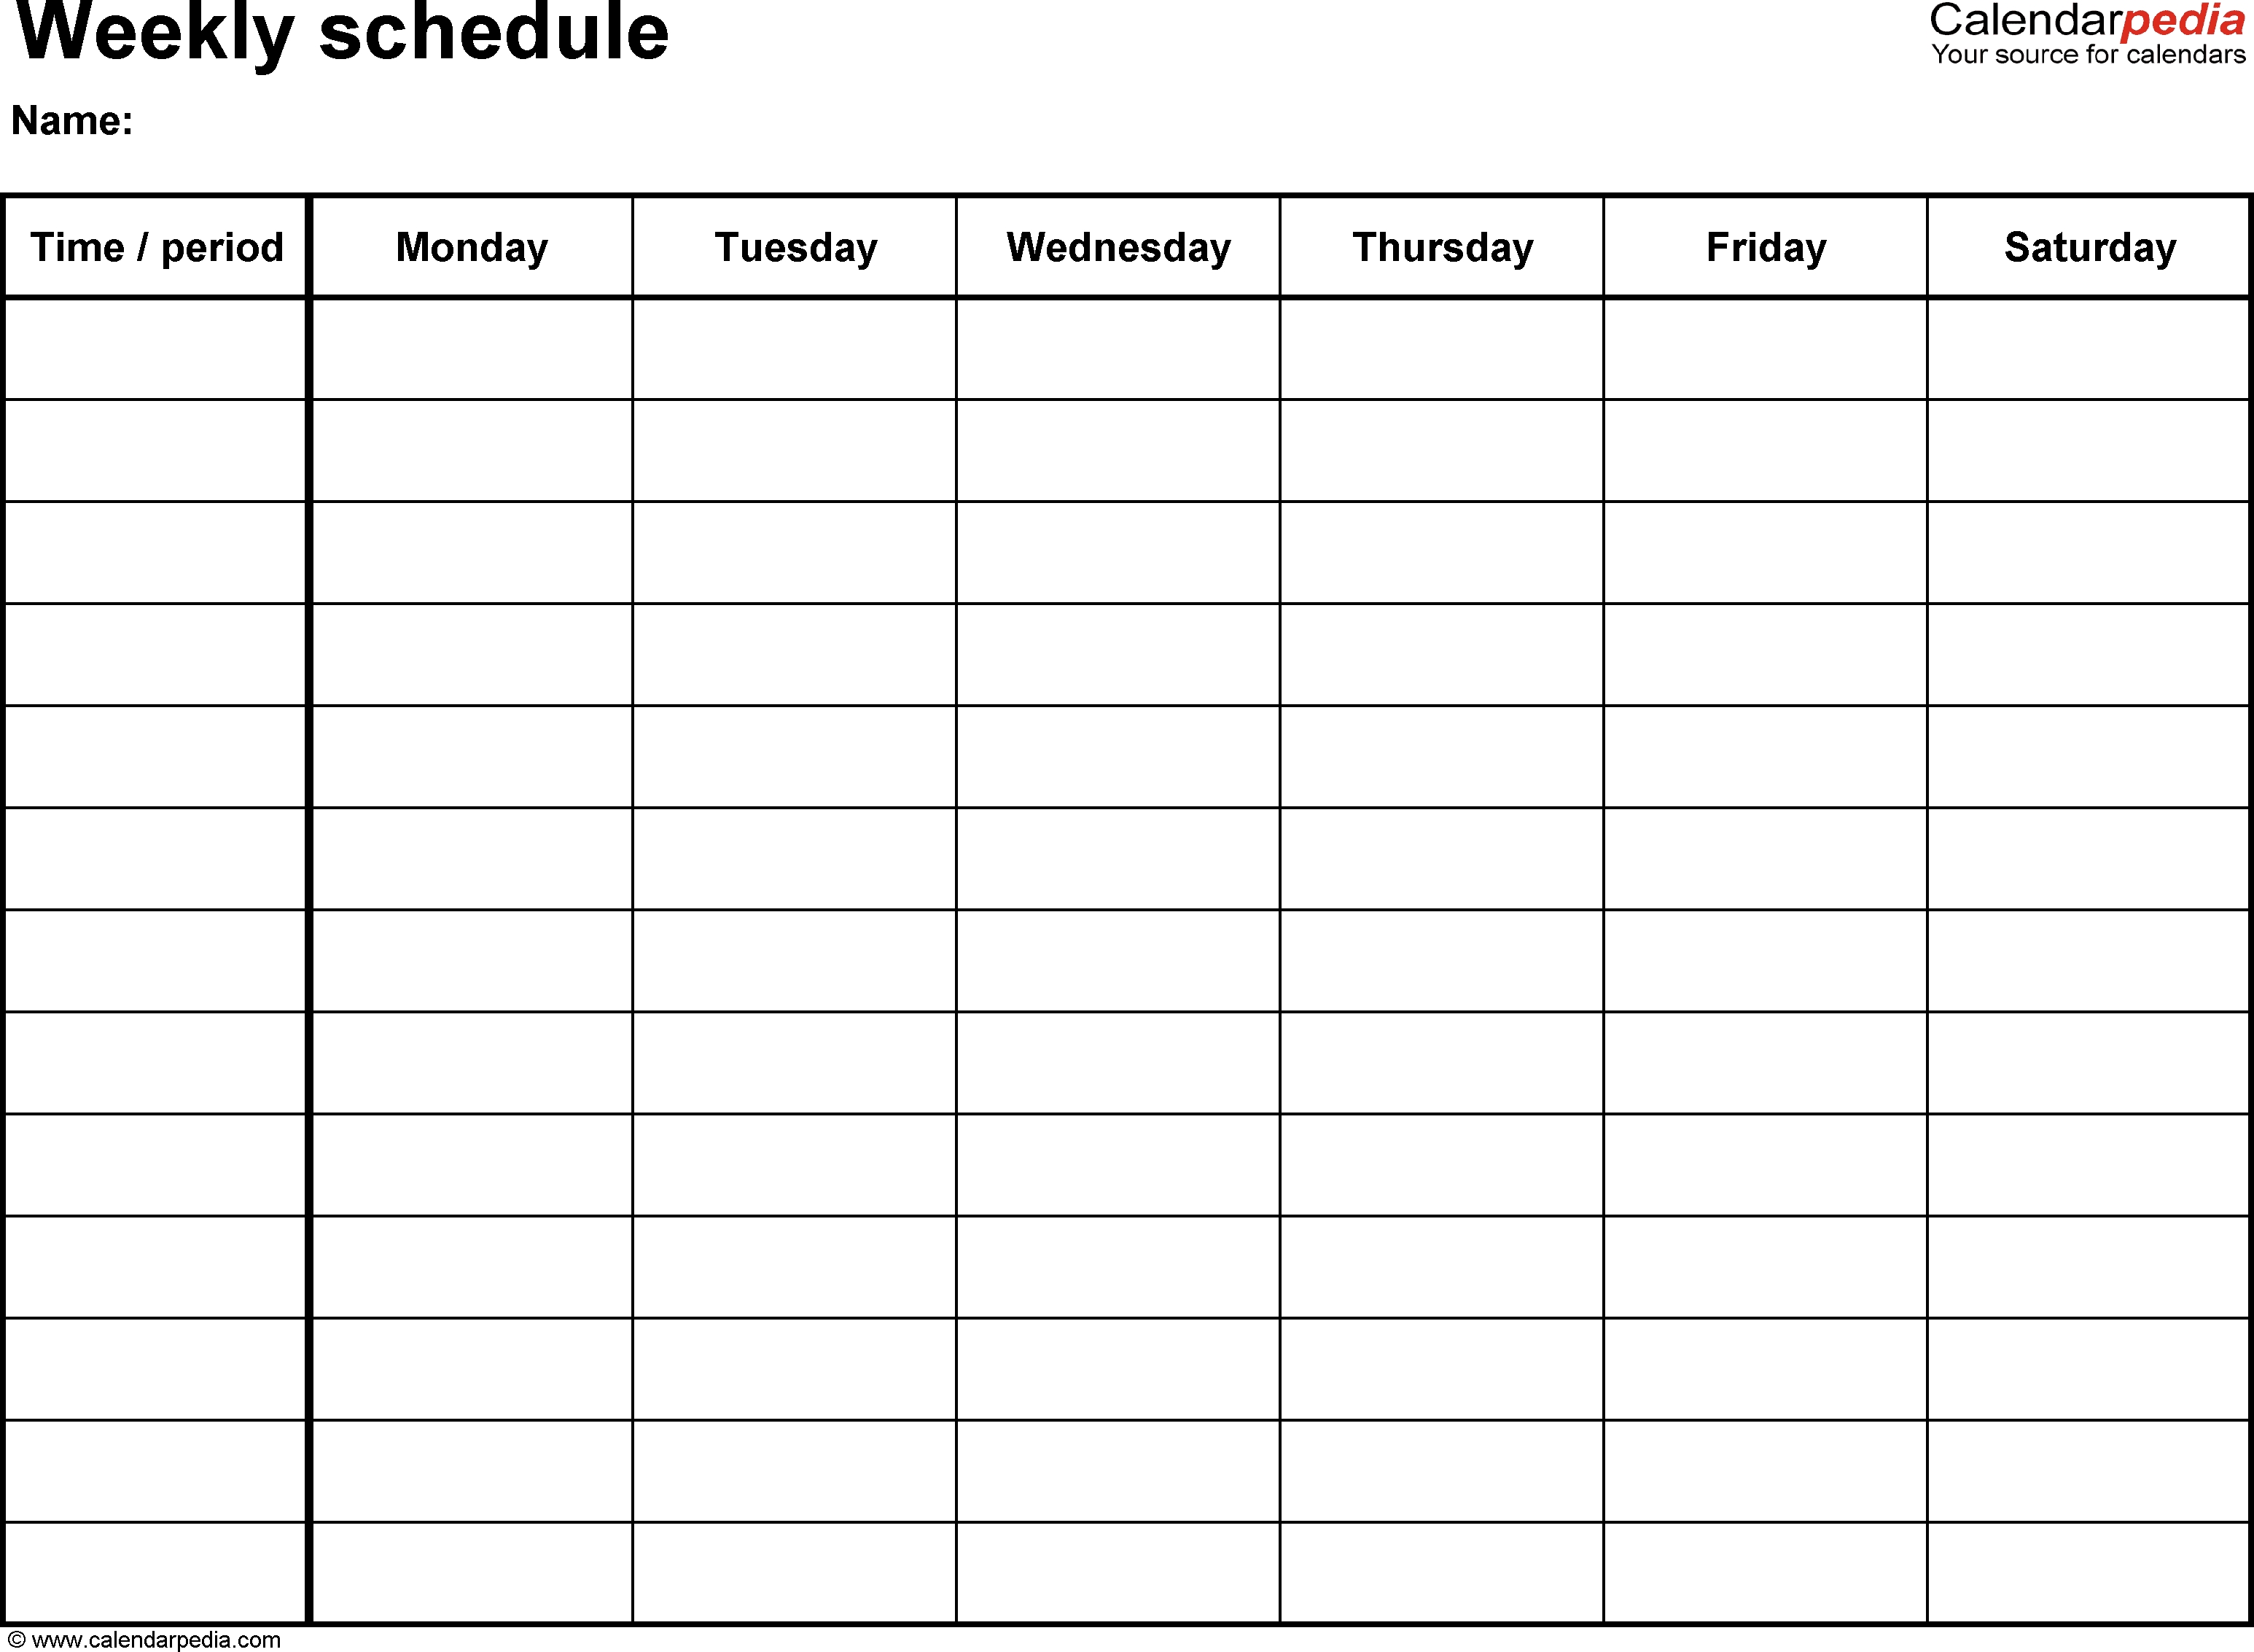 Free Weekly Schedule Templates For Word - 18 Templates for Free Blank Printable Weekly Calendar Template